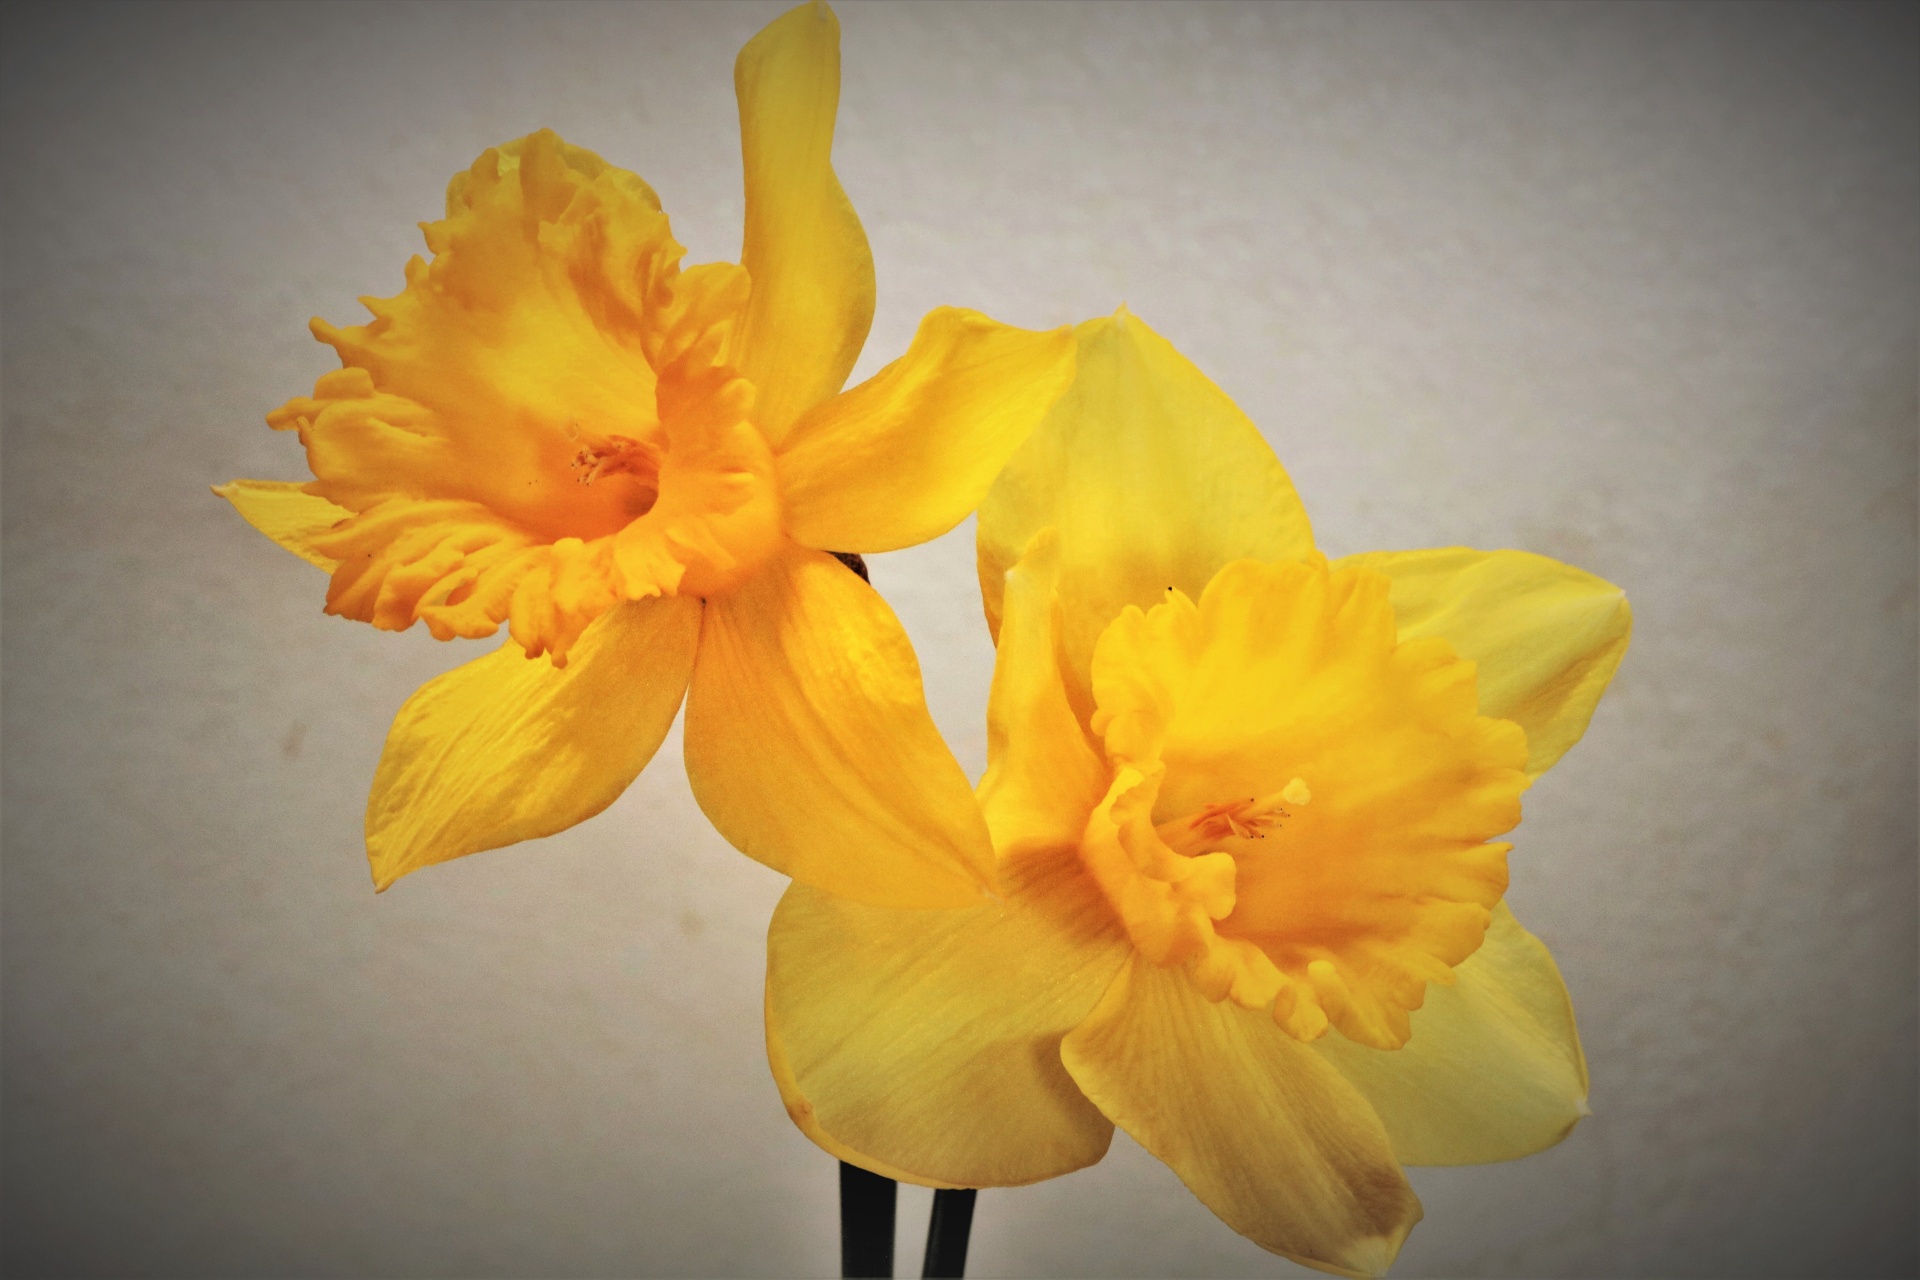 Two Yellow Daffodils Vignette